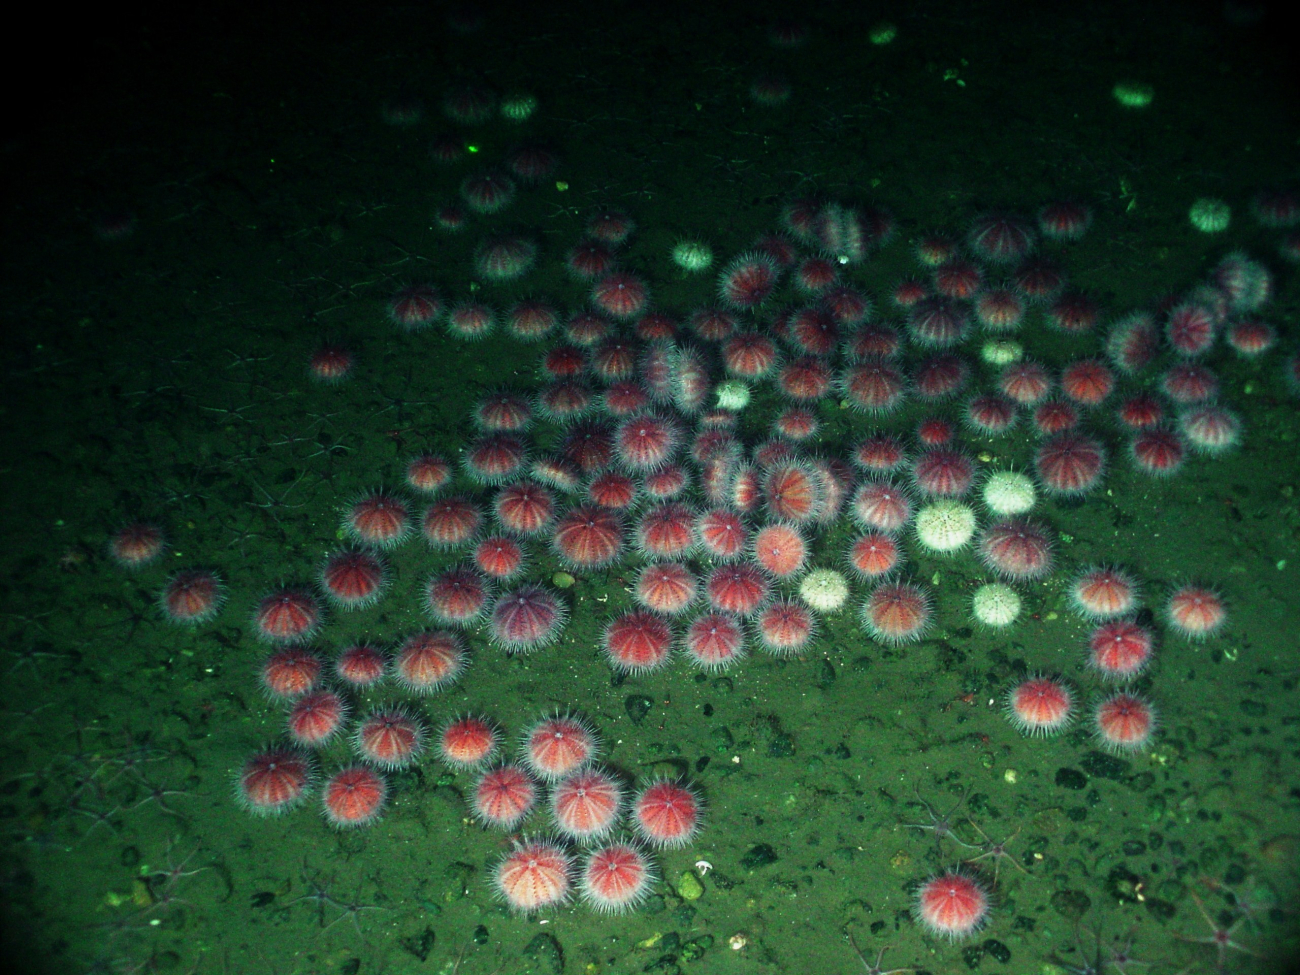 Congregation of the pink urchin (Allocentrotus fragilis) with afew white urchin (Stronglyocentrotus pallidus)